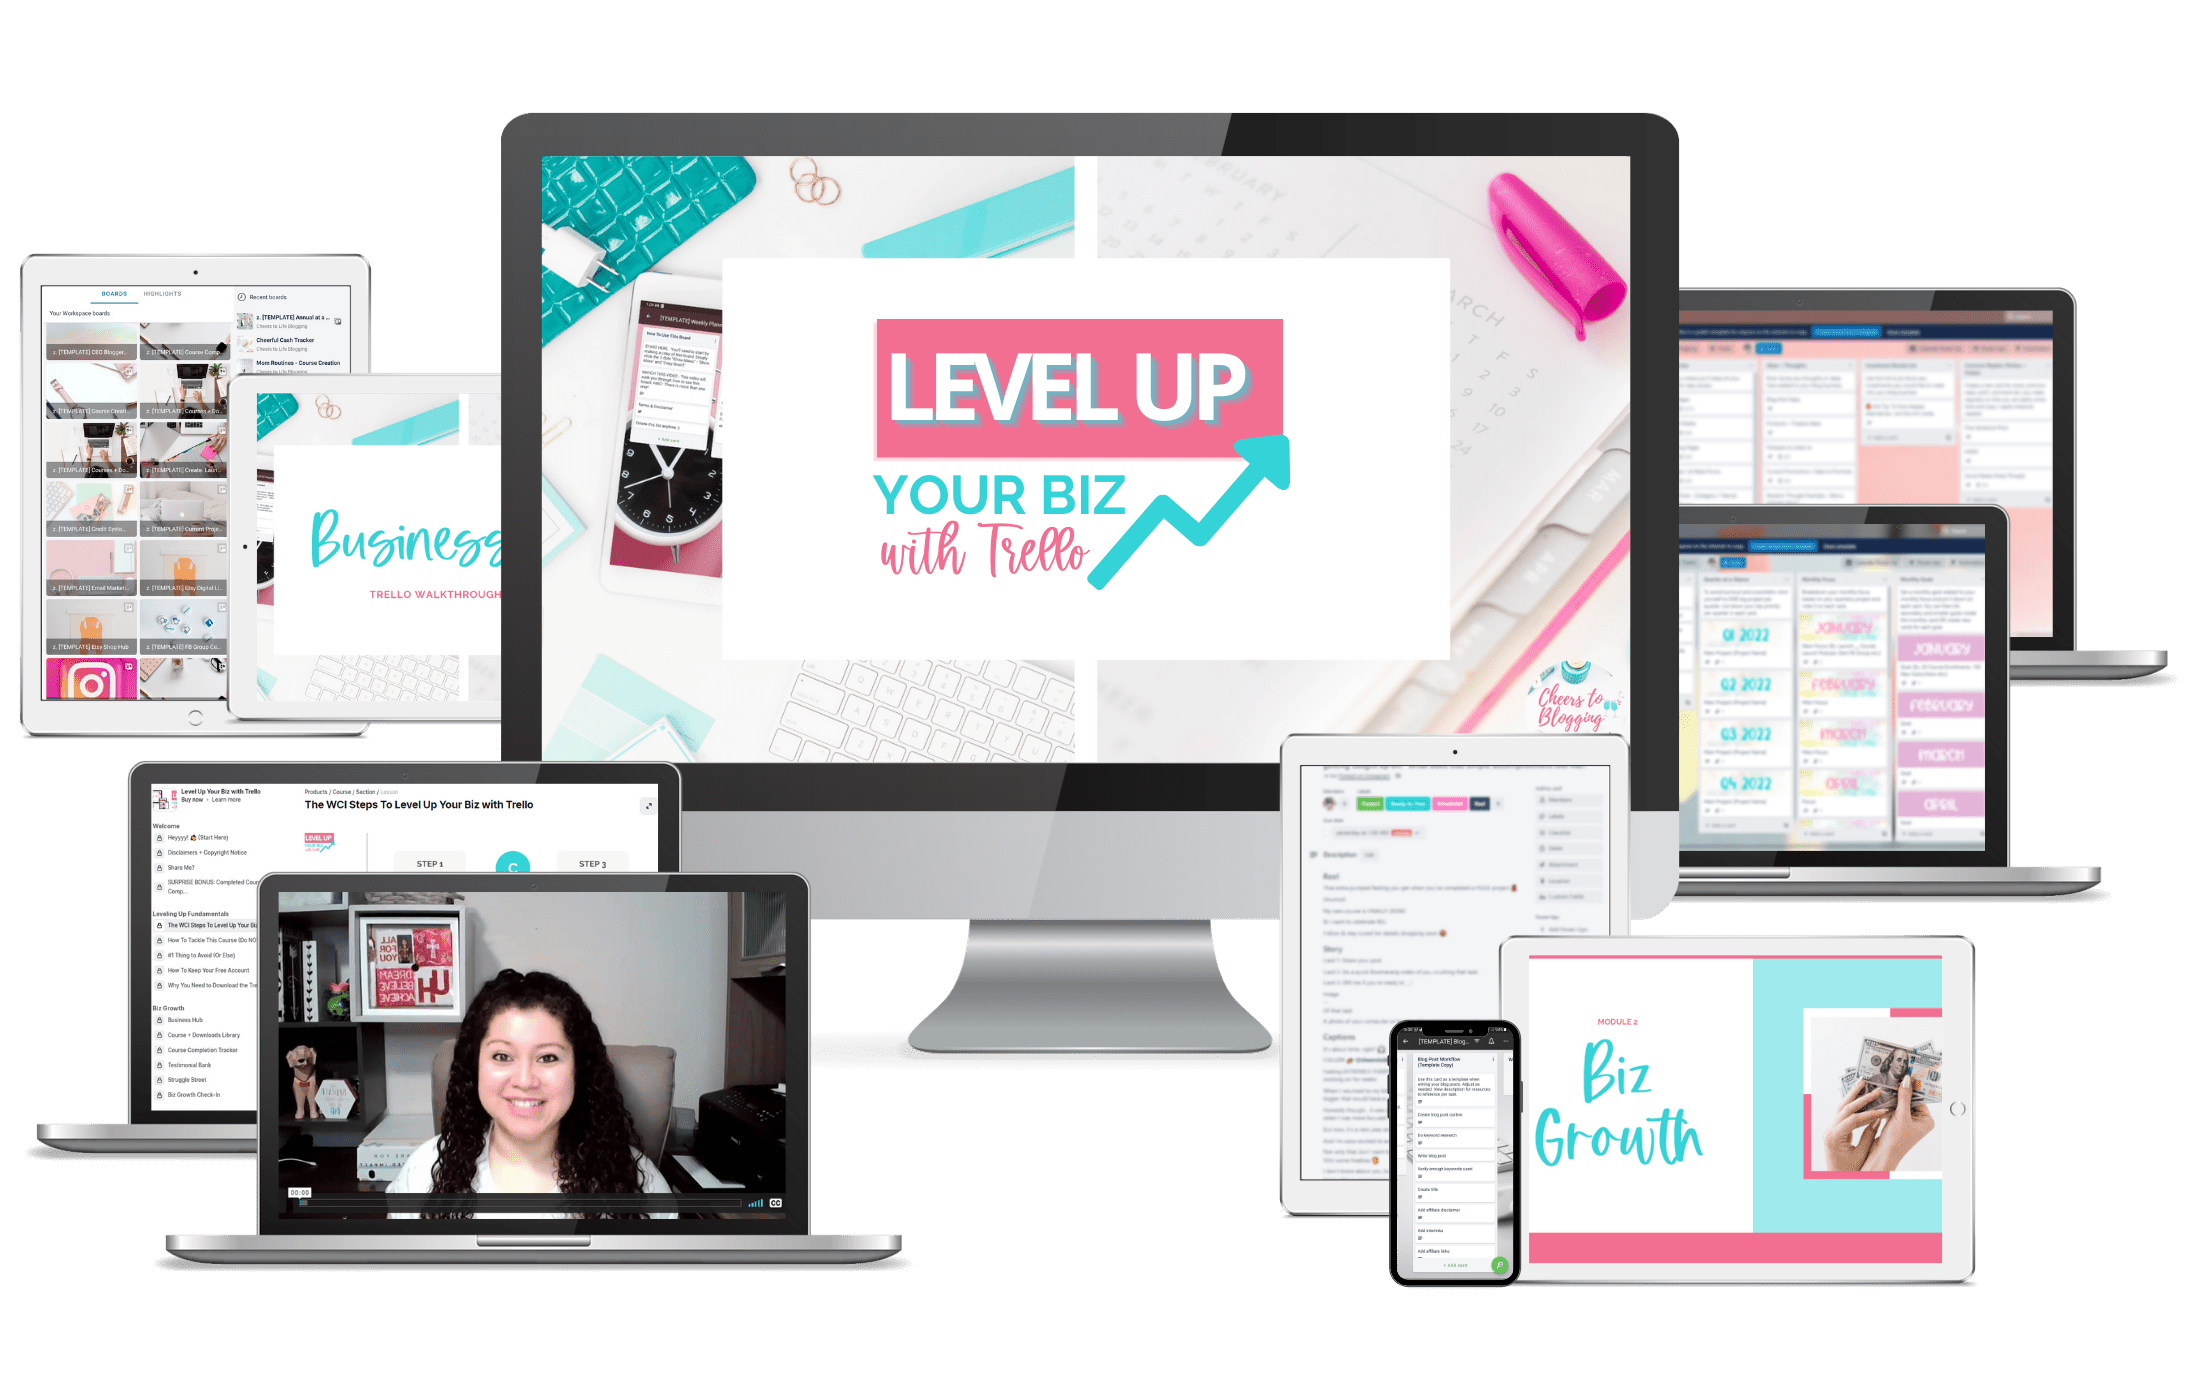 mockup of what's included in the Level Up Your Biz with Trello program.